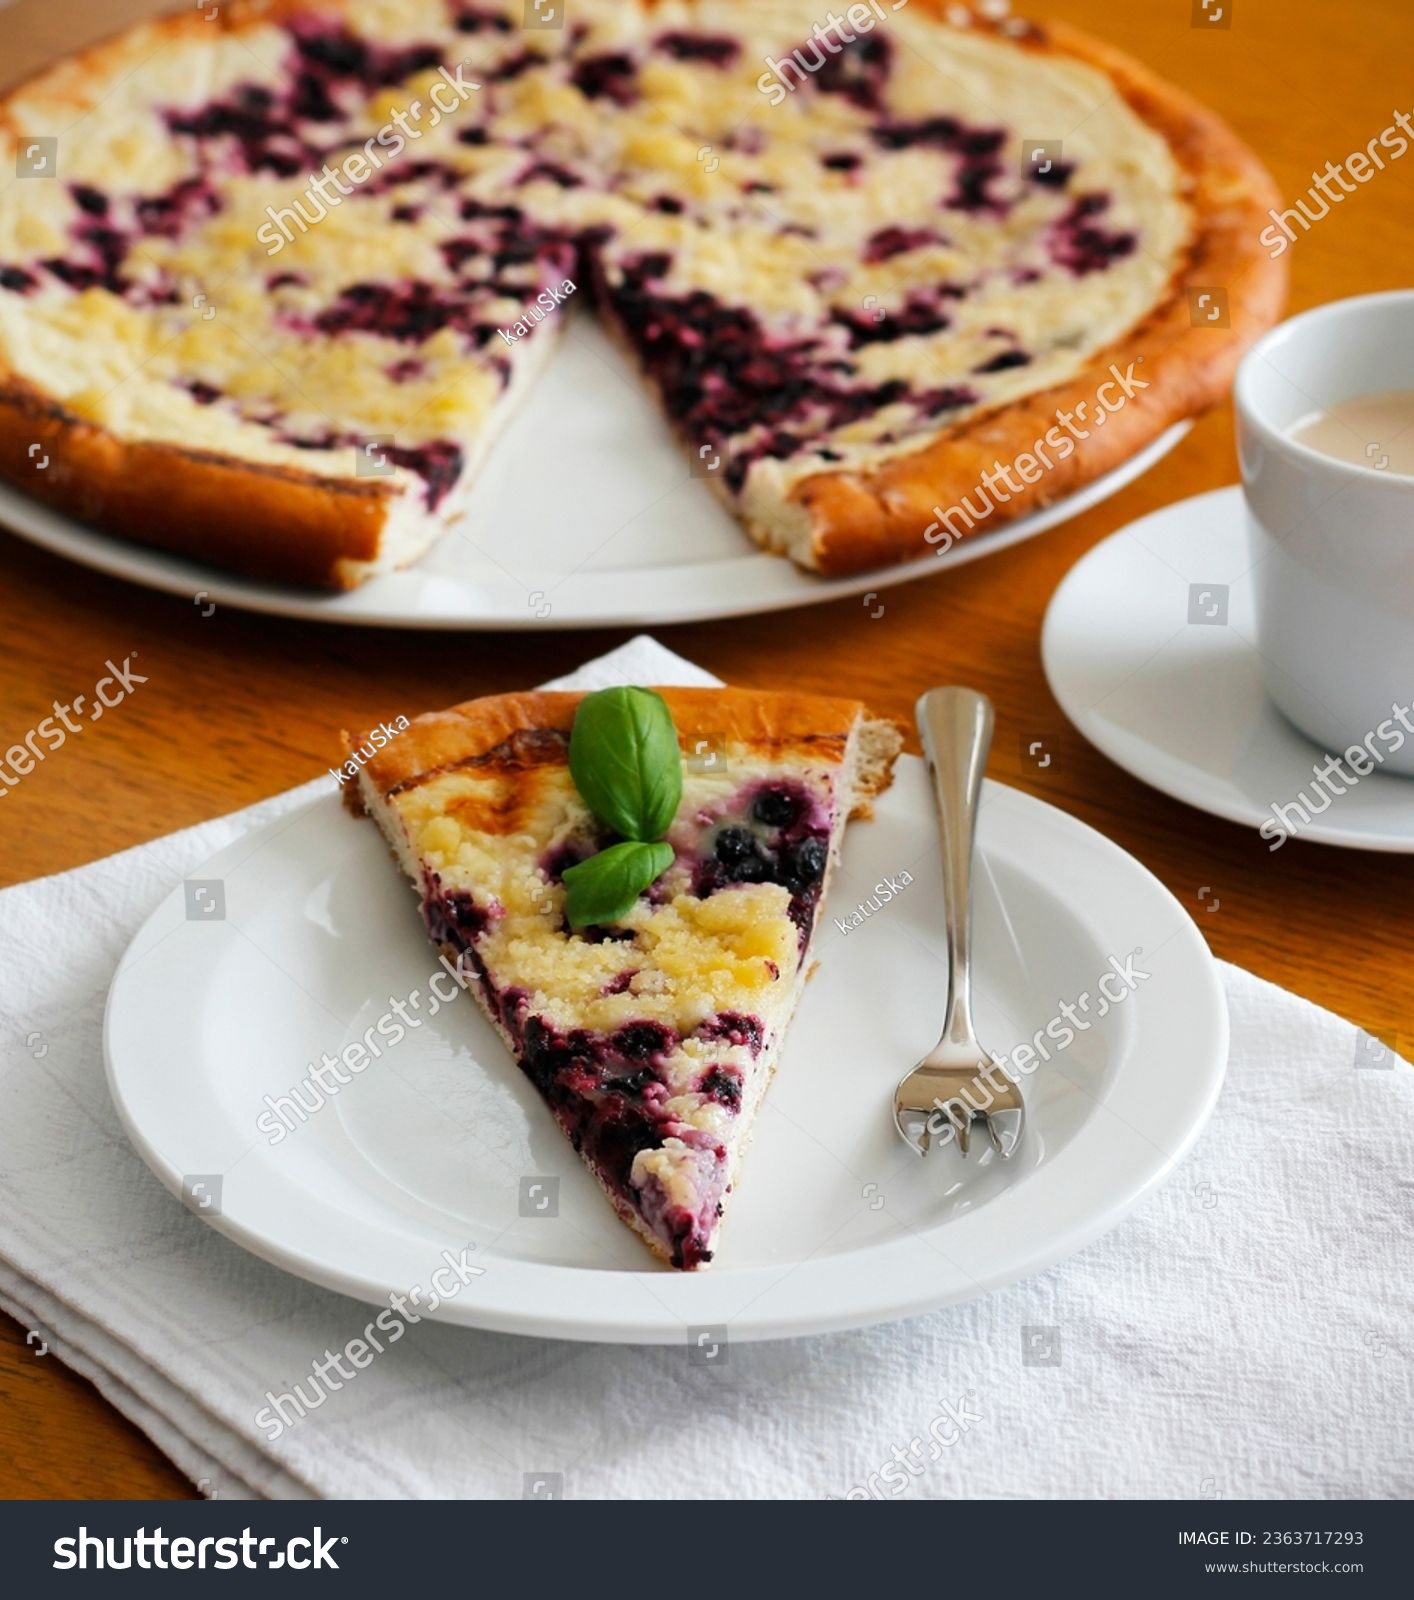 Piece of traditional Wallachian blueberry pie called "frgal" on a white plate. Traditional Moravian sweet dessert on wooden table. Typical Czech cuisine concept. Summer fruit cake. Selective focus. #2363717293